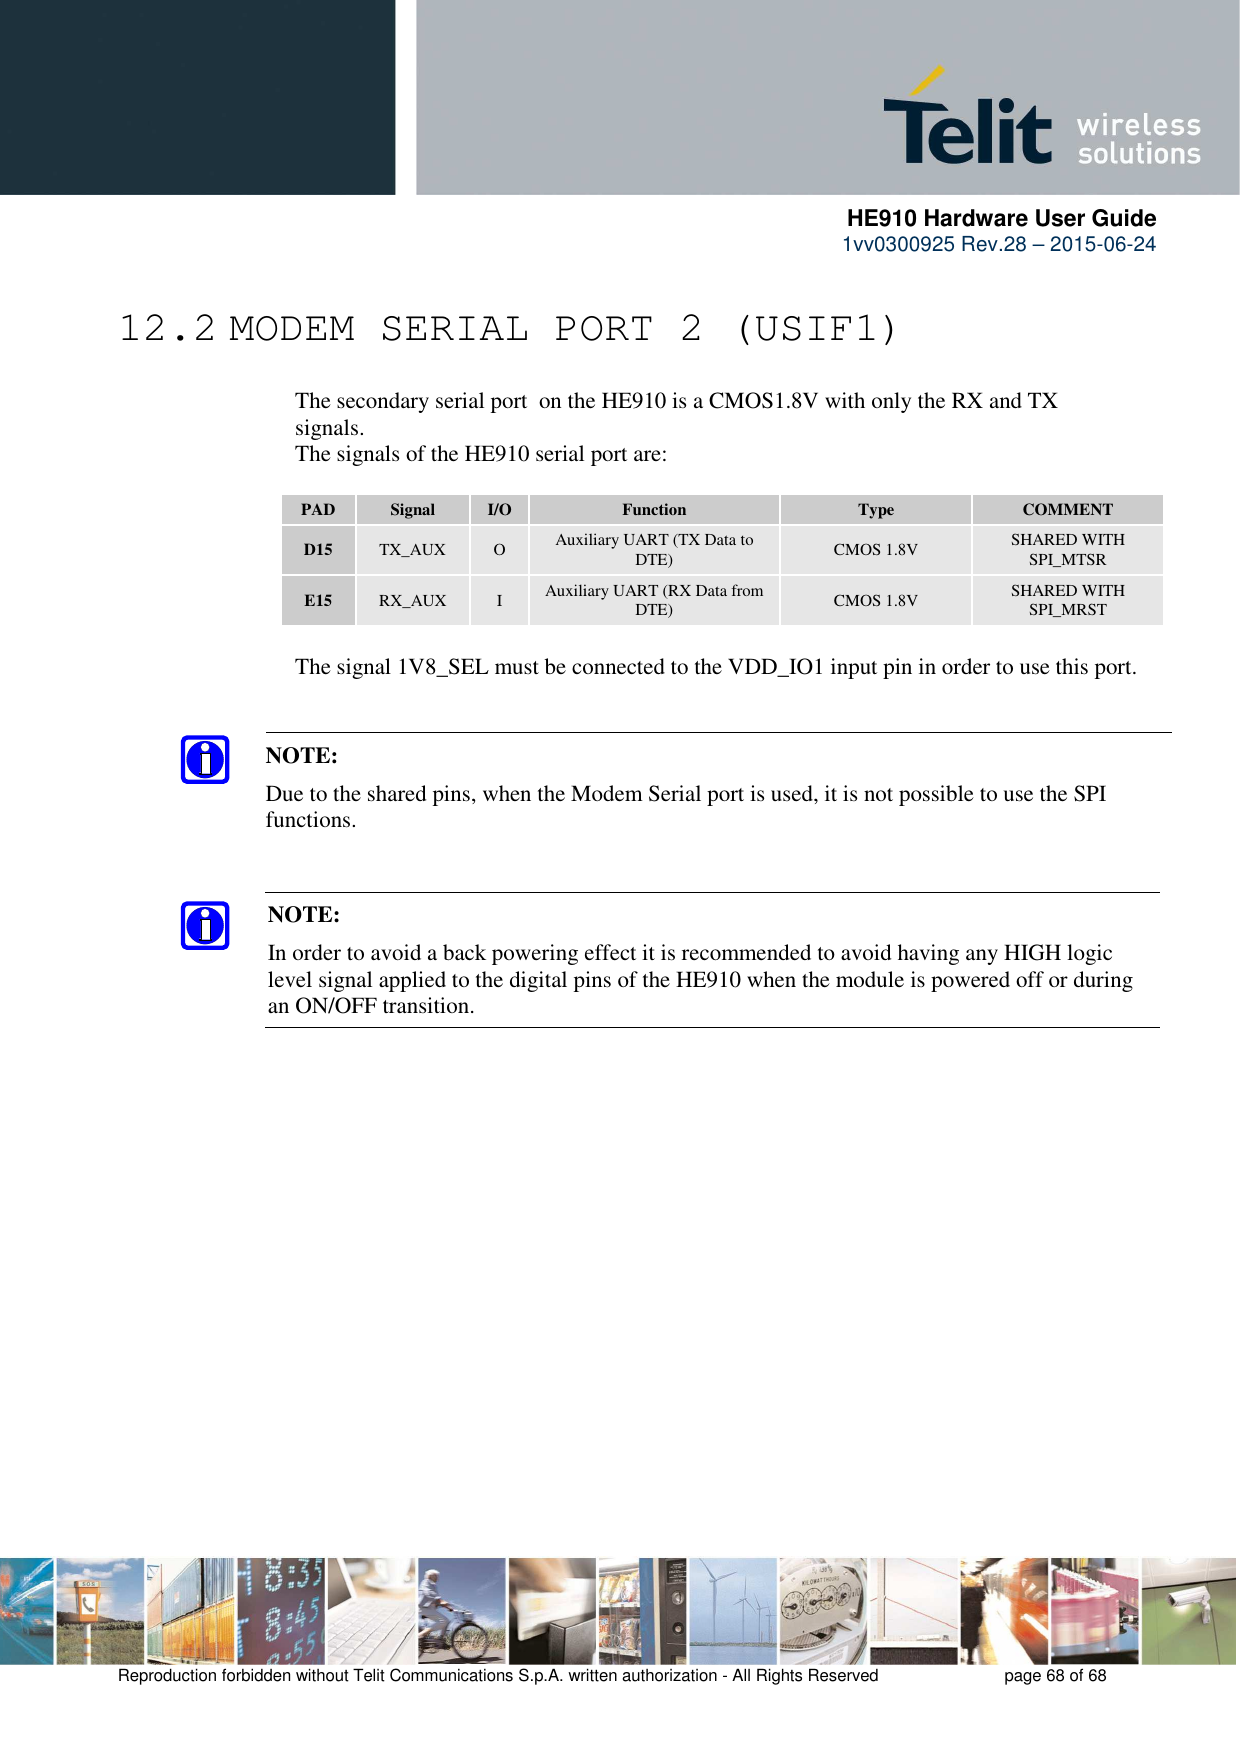      HE910 Hardware User Guide 1vv0300925 Rev.28 – 2015-06-24    Reproduction forbidden without Telit Communications S.p.A. written authorization - All Rights Reserved    page 68 of 68  12.2 MODEM SERIAL PORT 2 (USIF1)     The secondary serial port  on the HE910 is a CMOS1.8V with only the RX and TX      signals.      The signals of the HE910 serial port are:  PAD  Signal  I/O  Function  Type  COMMENT D15  TX_AUX  O  Auxiliary UART (TX Data to DTE)  CMOS 1.8V  SHARED WITH SPI_MTSR E15  RX_AUX  I  Auxiliary UART (RX Data from DTE)  CMOS 1.8V  SHARED WITH SPI_MRST    The signal 1V8_SEL must be connected to the VDD_IO1 input pin in order to use this port.   NOTE: In order to avoid a back powering effect it is recommended to avoid having any HIGH logic level signal applied to the digital pins of the HE910 when the module is powered off or during an ON/OFF transition.  NOTE:  Due to the shared pins, when the Modem Serial port is used, it is not possible to use the SPI functions. 